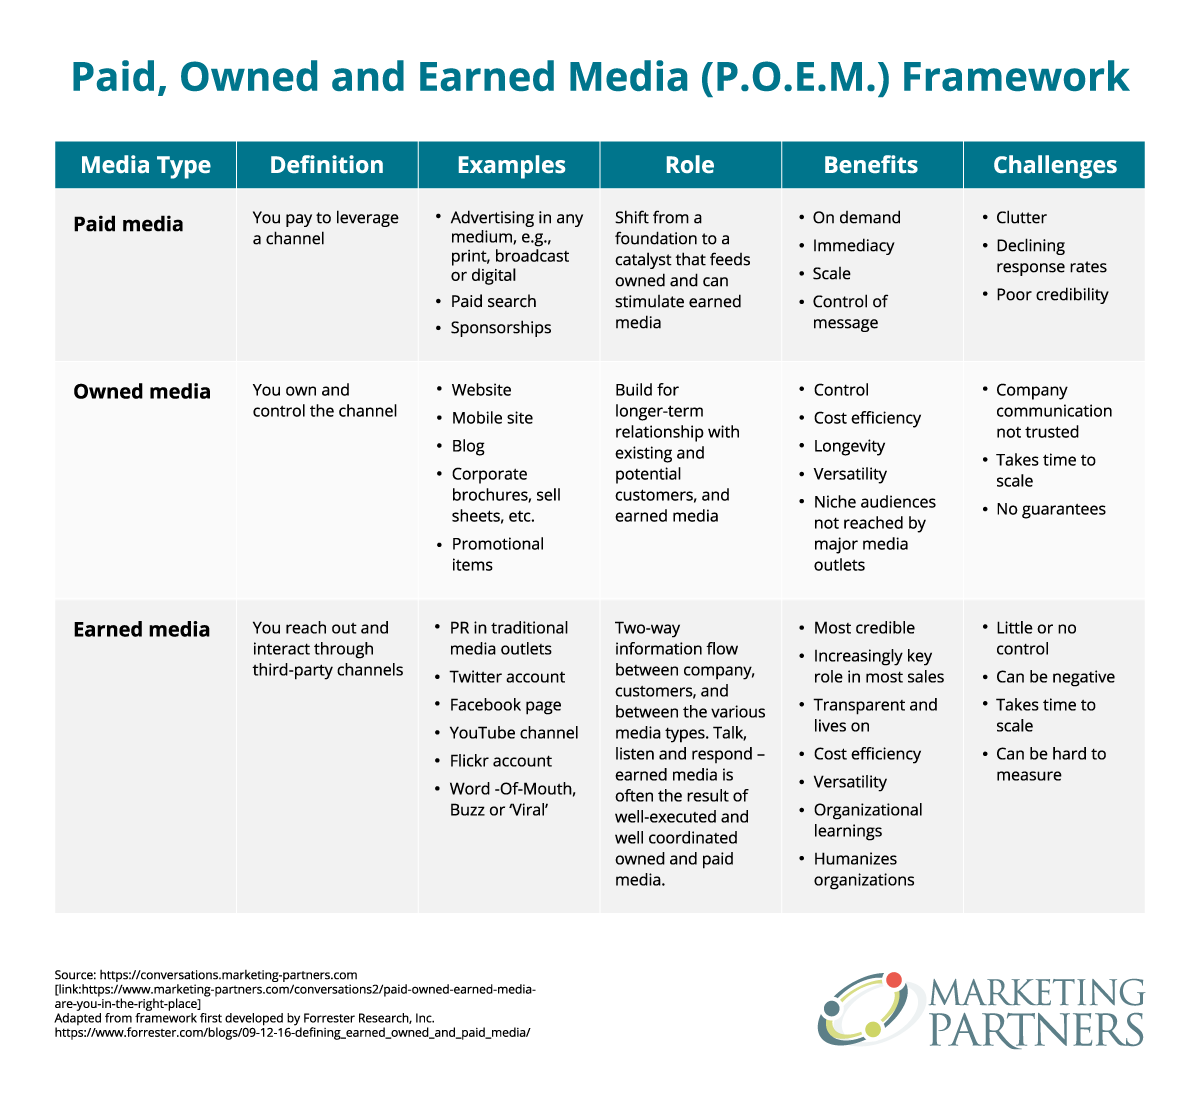 table showing Paid, Owned and Earned Media (POEM) Framework